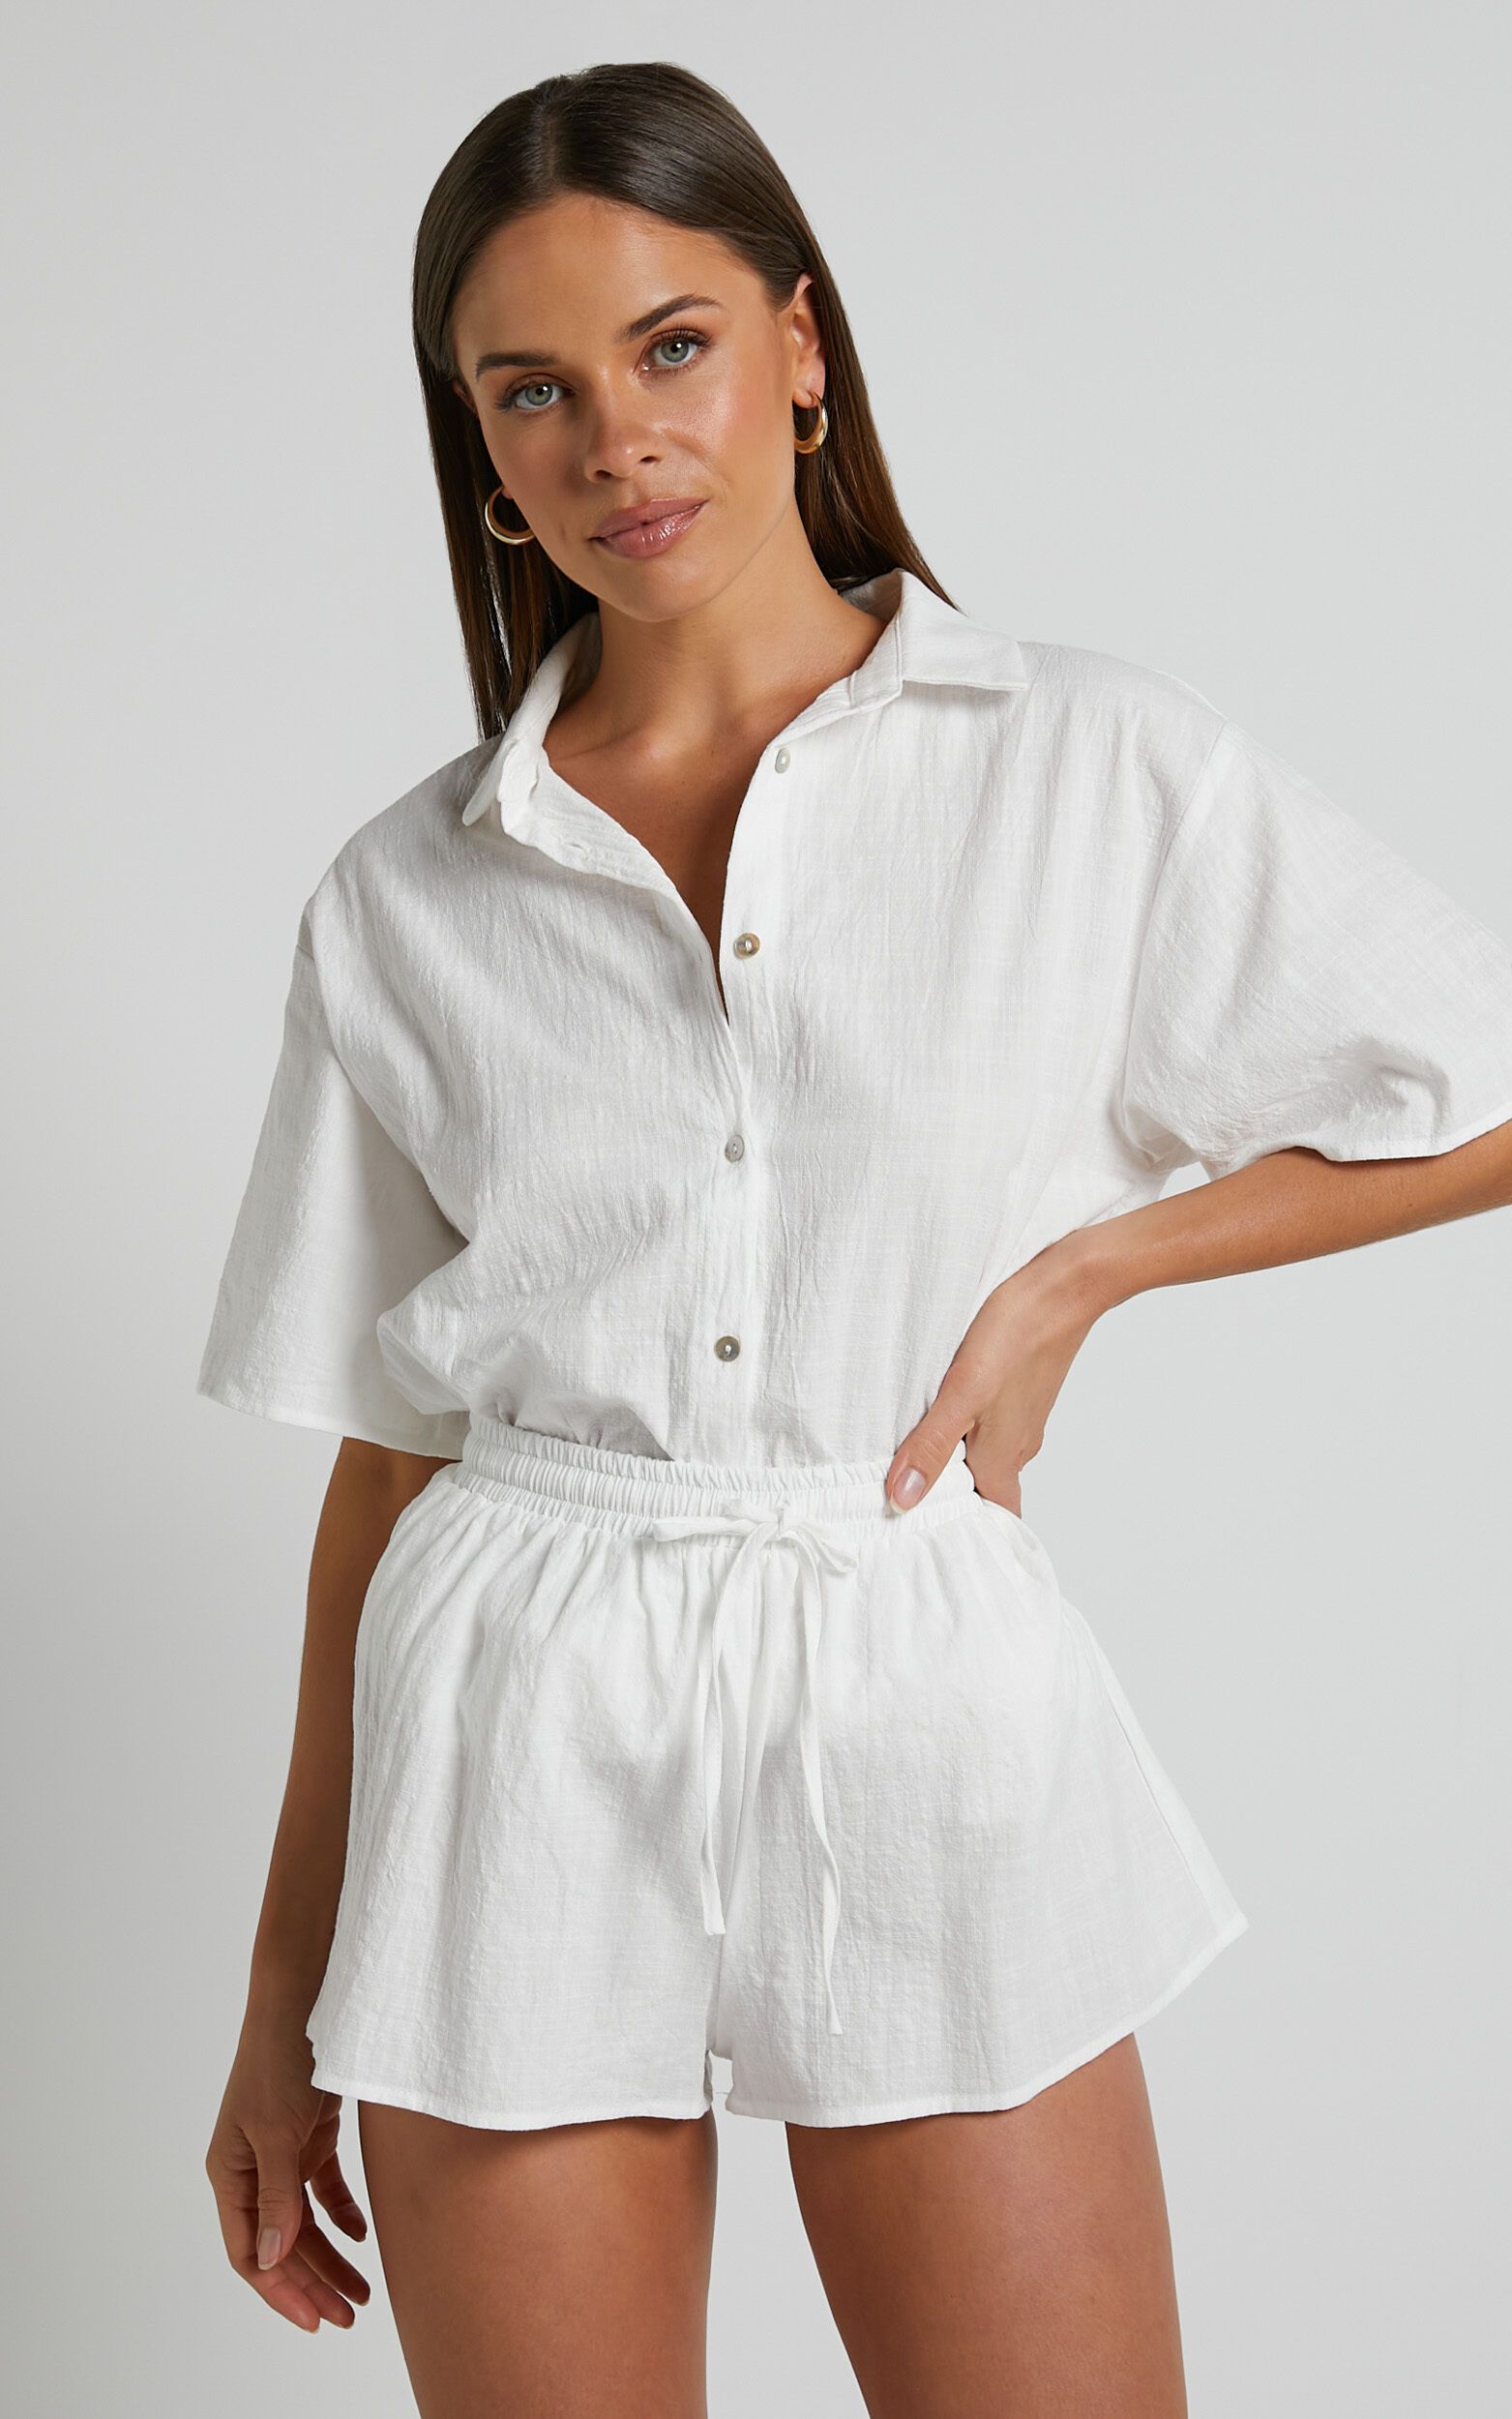 Vina del Mar Button Up Shirt and Shorts Two Piece Set in White | Showpo (US, UK & Europe)